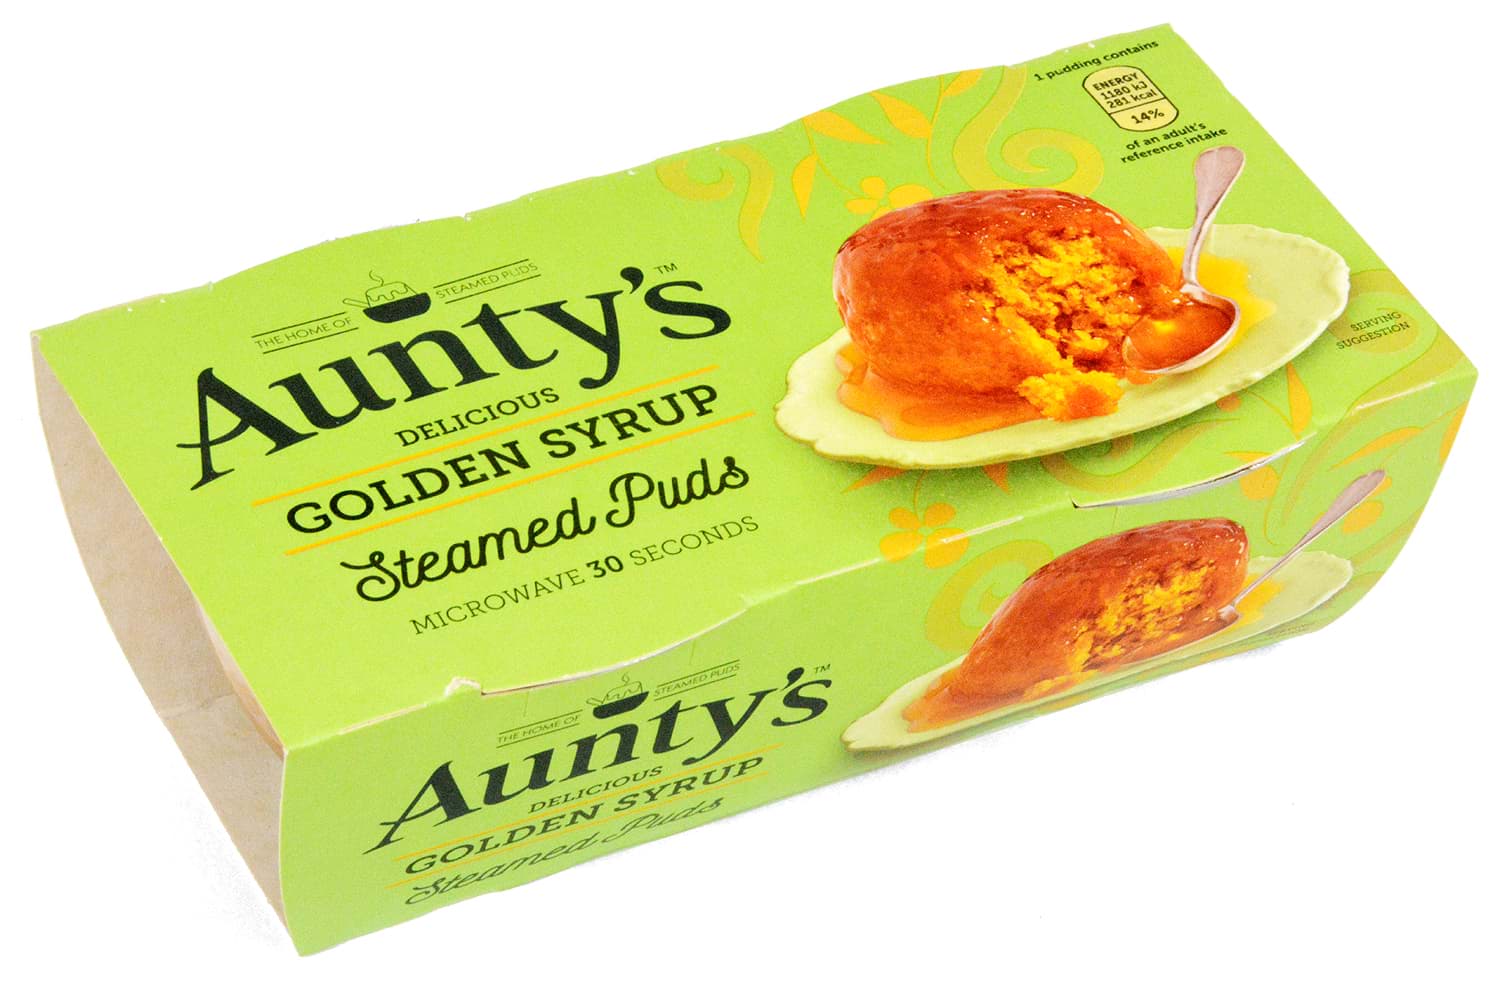 Picture of Auntys Golden Syrup Sauce Steamed Puddings 2 x 95g